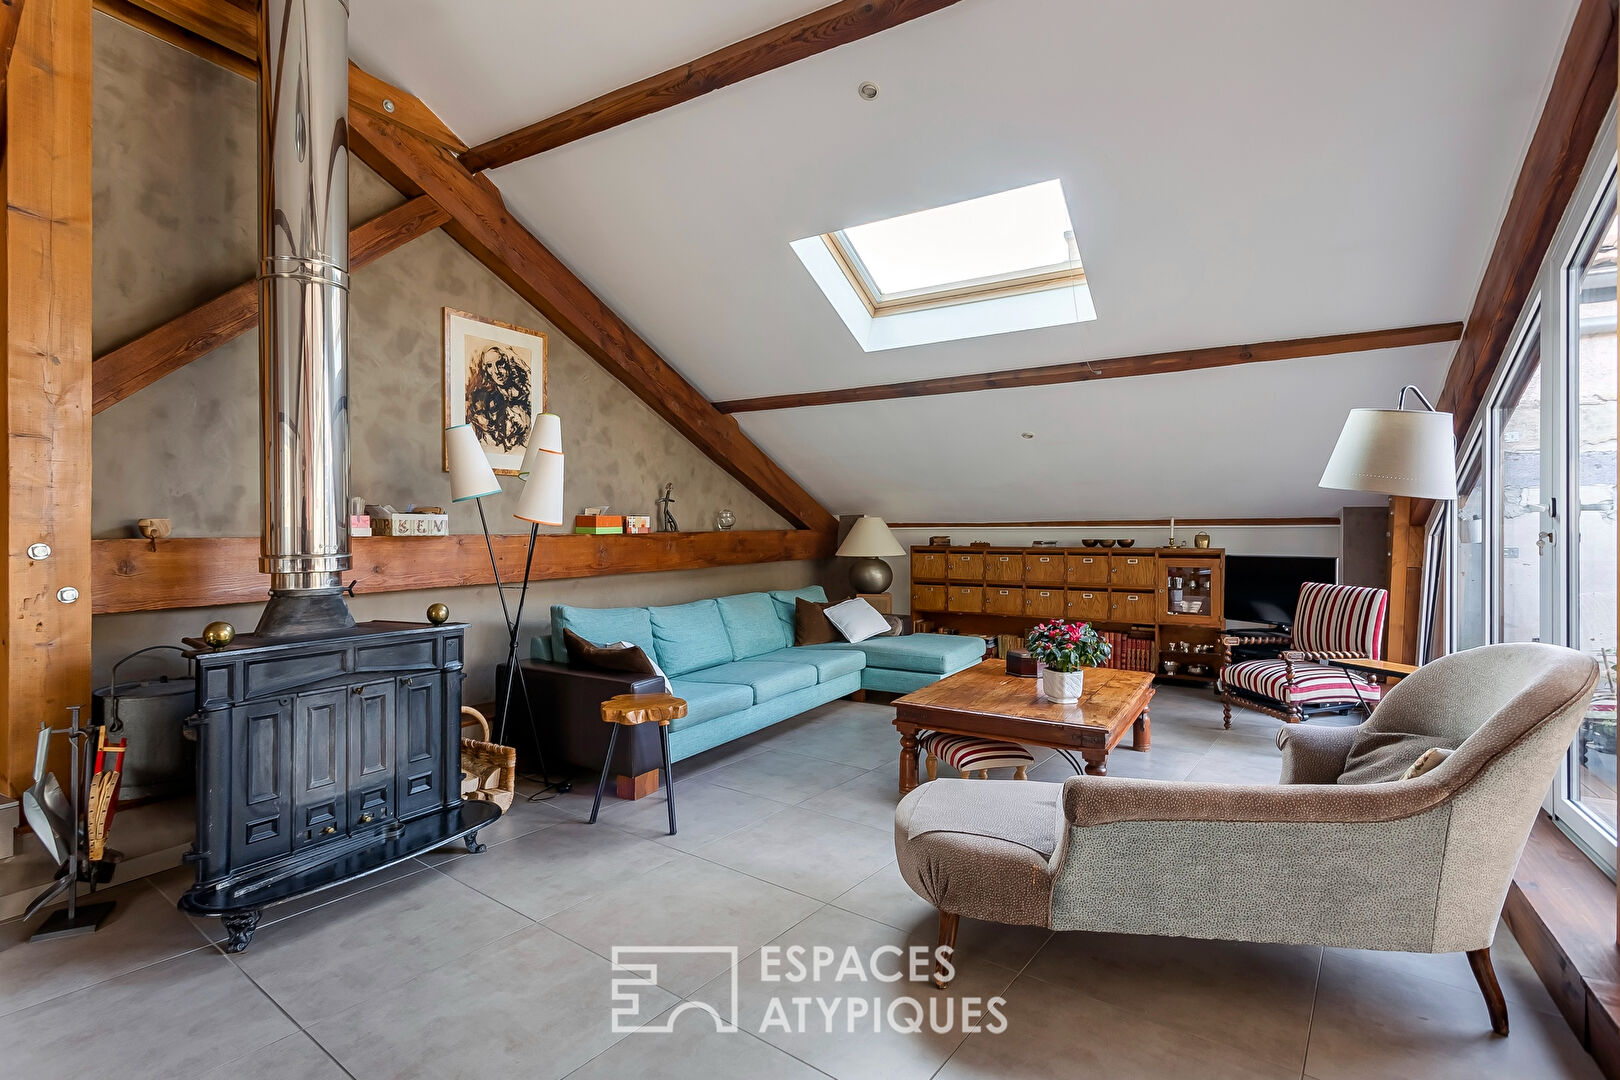 Top floor loft with terrace and large garage